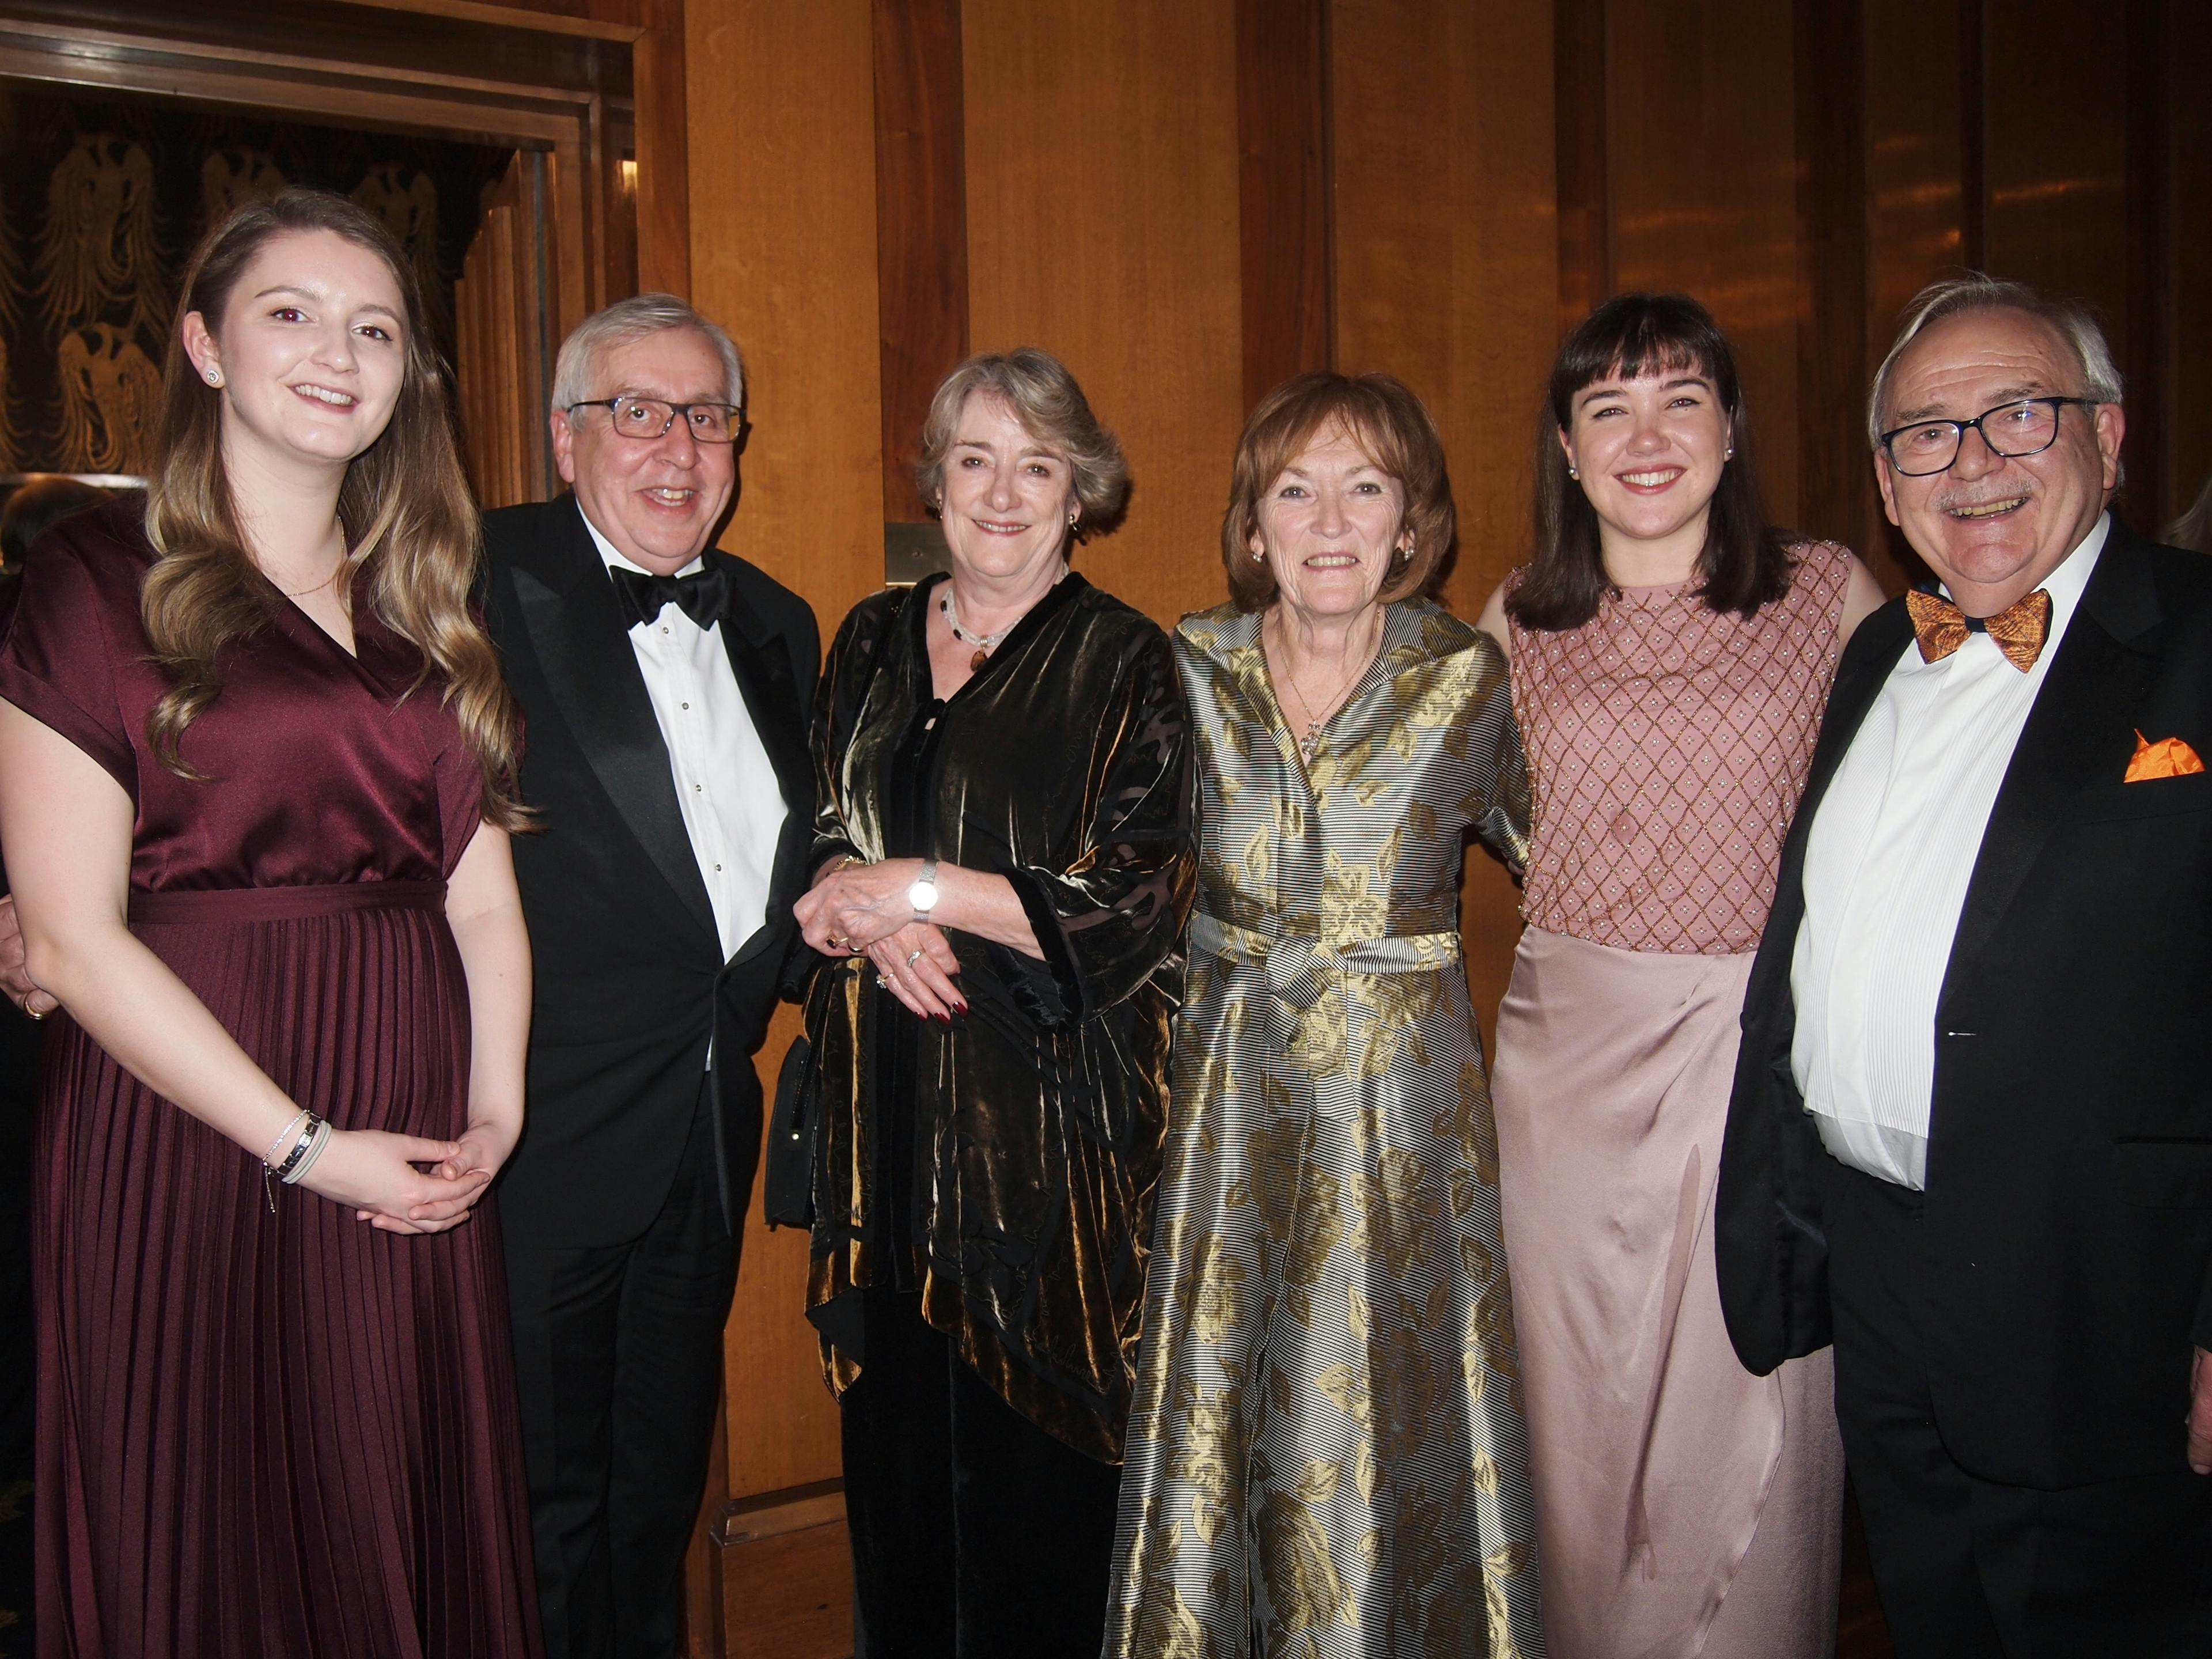 Pictured at Irish Heritage’s 2020 City Dinner in Baker’s Hall are (left to right): Ellen Mawhinney (Irish Heritage bursary recipient); John O’Neill, Managing Director Lifestyle Residences; Linda Tanner, Irish Youth Foundation; Lady Mary Hatch, Patron Irish Heritage; Mollie Wrafter, Irish Heritage bursary recipient and Patrick Lennon, former Chairman Irish Heritage.